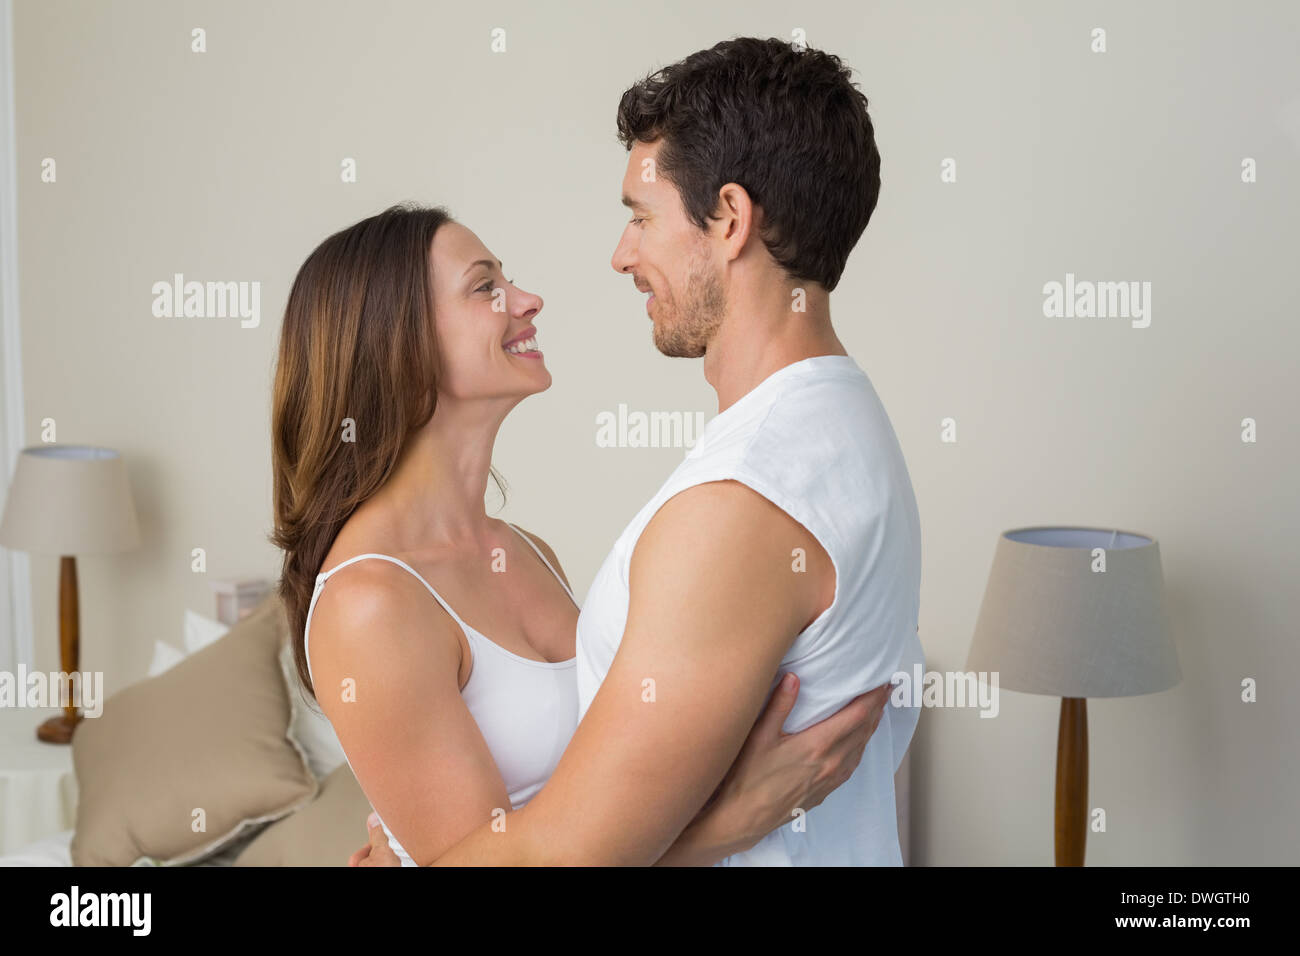 Loving couple at home Banque D'Images